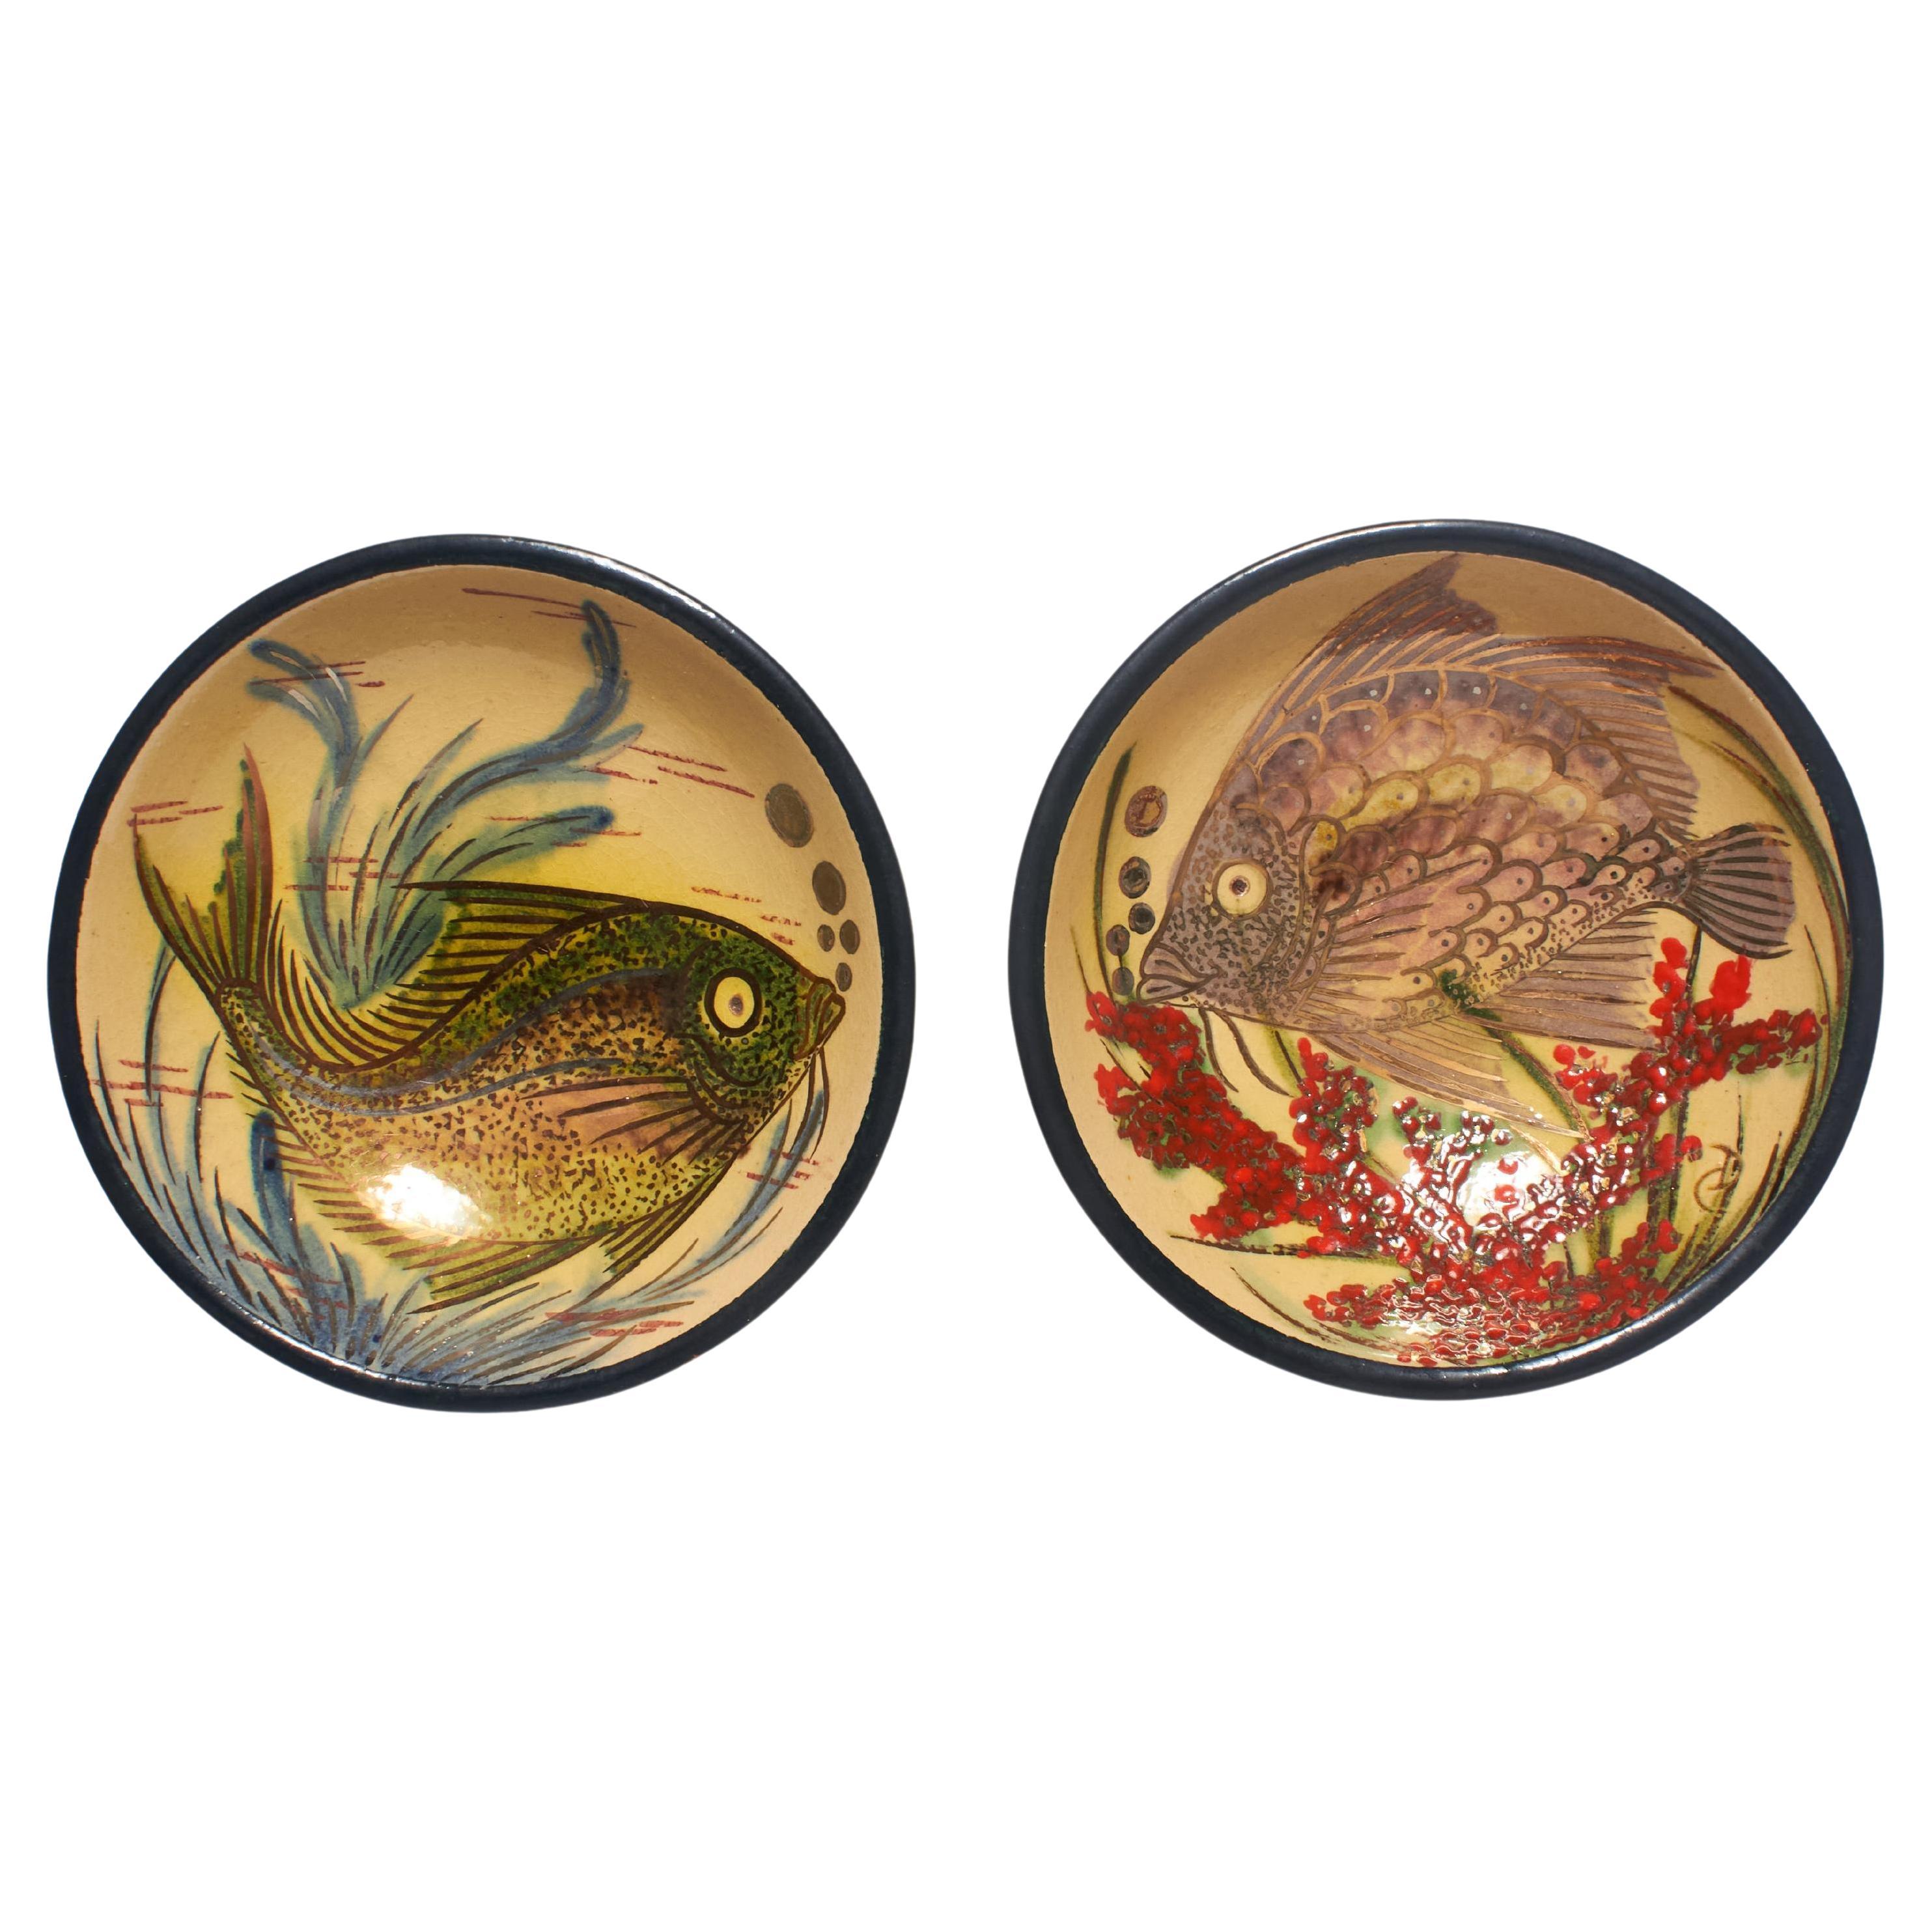 Pair of Vintage Hand-Painted Ceramic Plates by Catalan Artist Diaz Costa For Sale